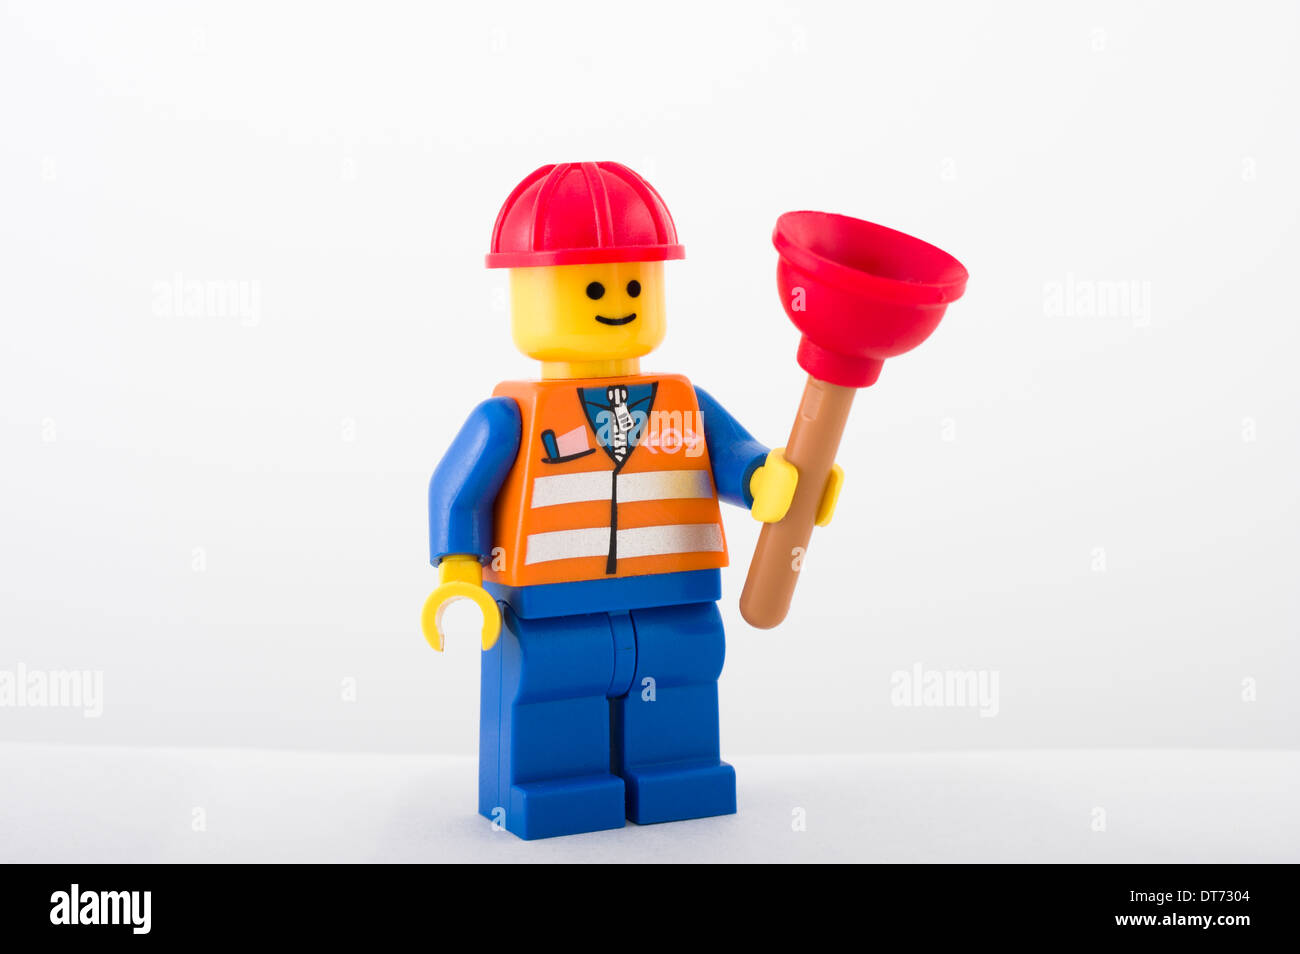 Lego by Lego Group invented by Ole Kirk Christiansen made Billund - Alamy